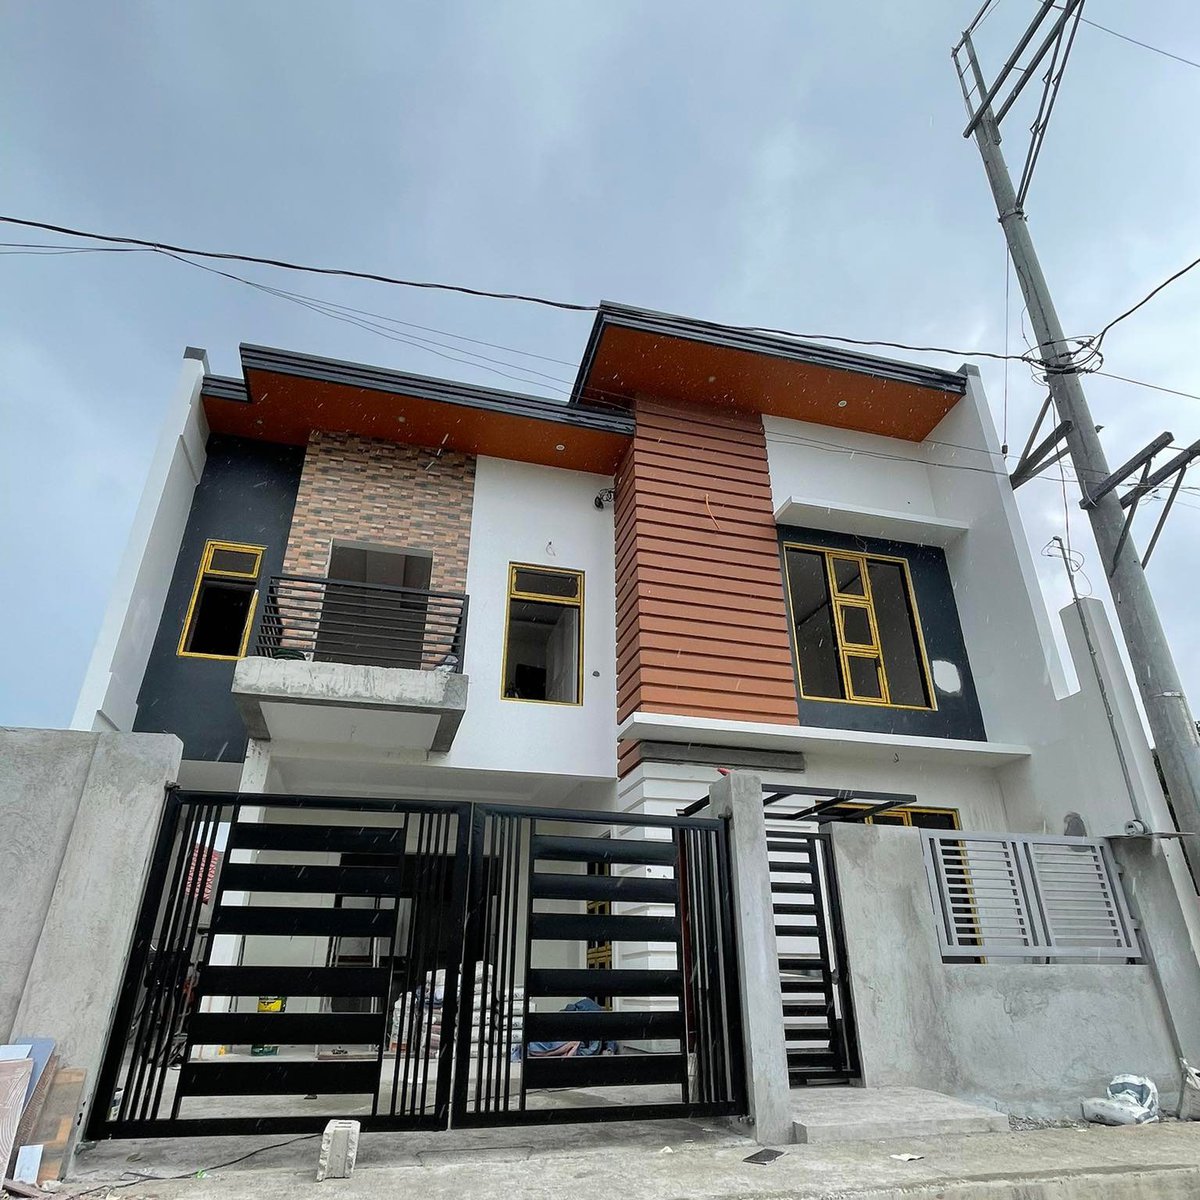 3-bedroom Single Detached House For Sale in San Mateo Rizal